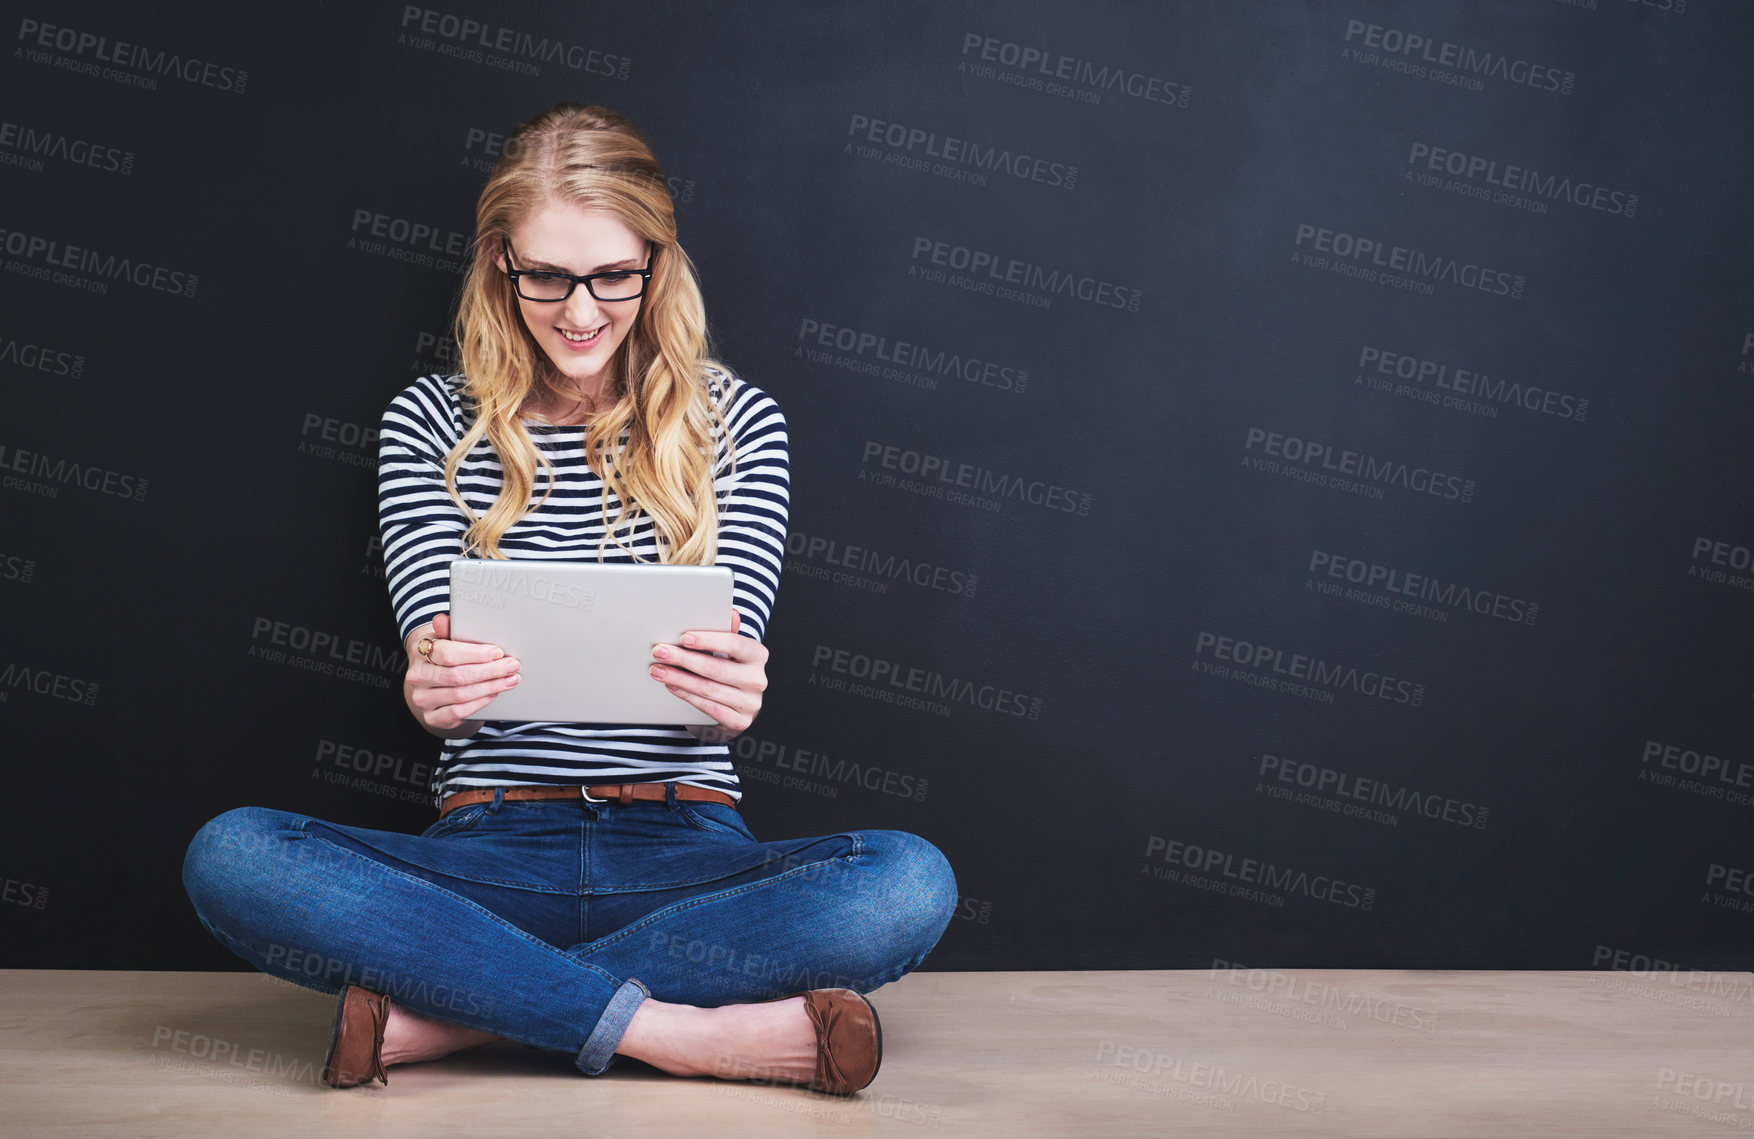 Buy stock photo Studio shot of a young woman using a digital tablet against a dark background